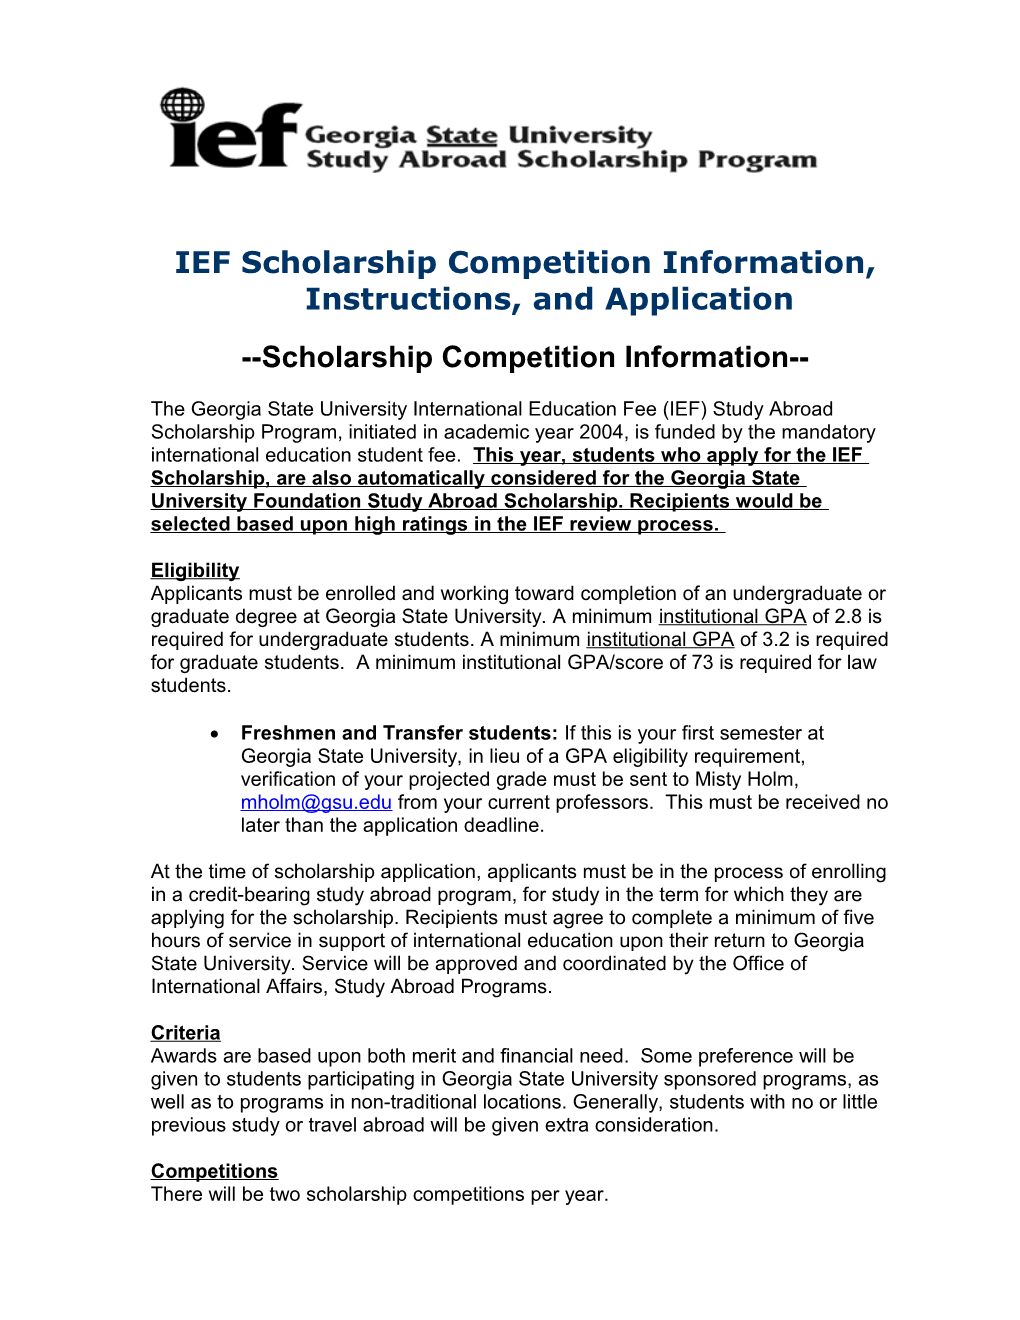 IEF Scholarship Competition Information, Instructions, and Application